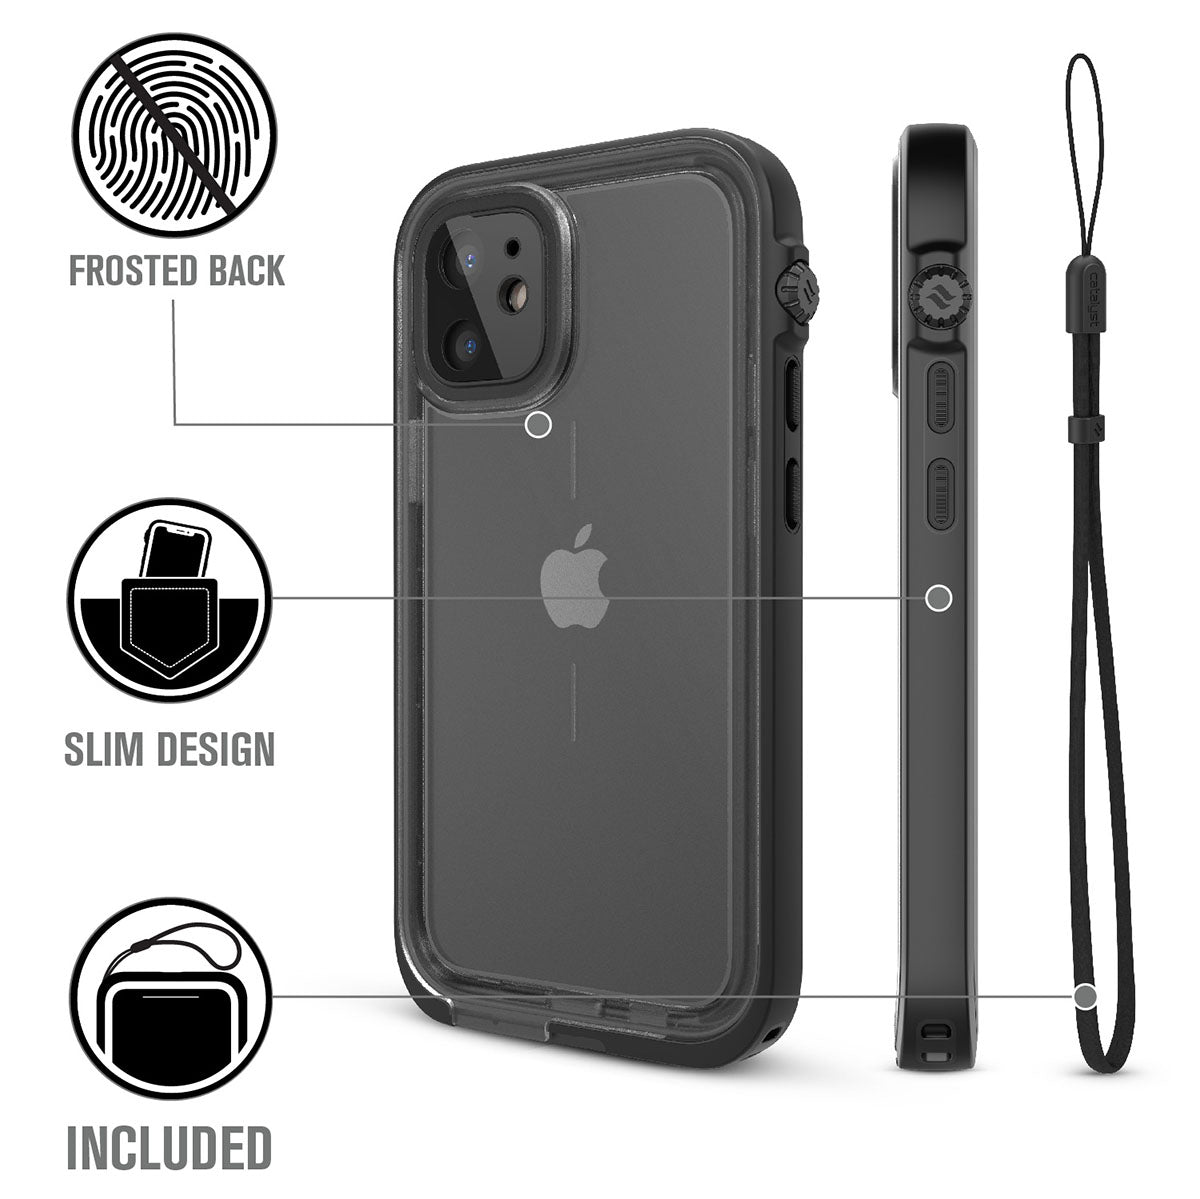 Catalyst iPhone 12 mini waterproof case total protection drop proof water proof front back case with lanyard Text reads frosted back slim design slim design included